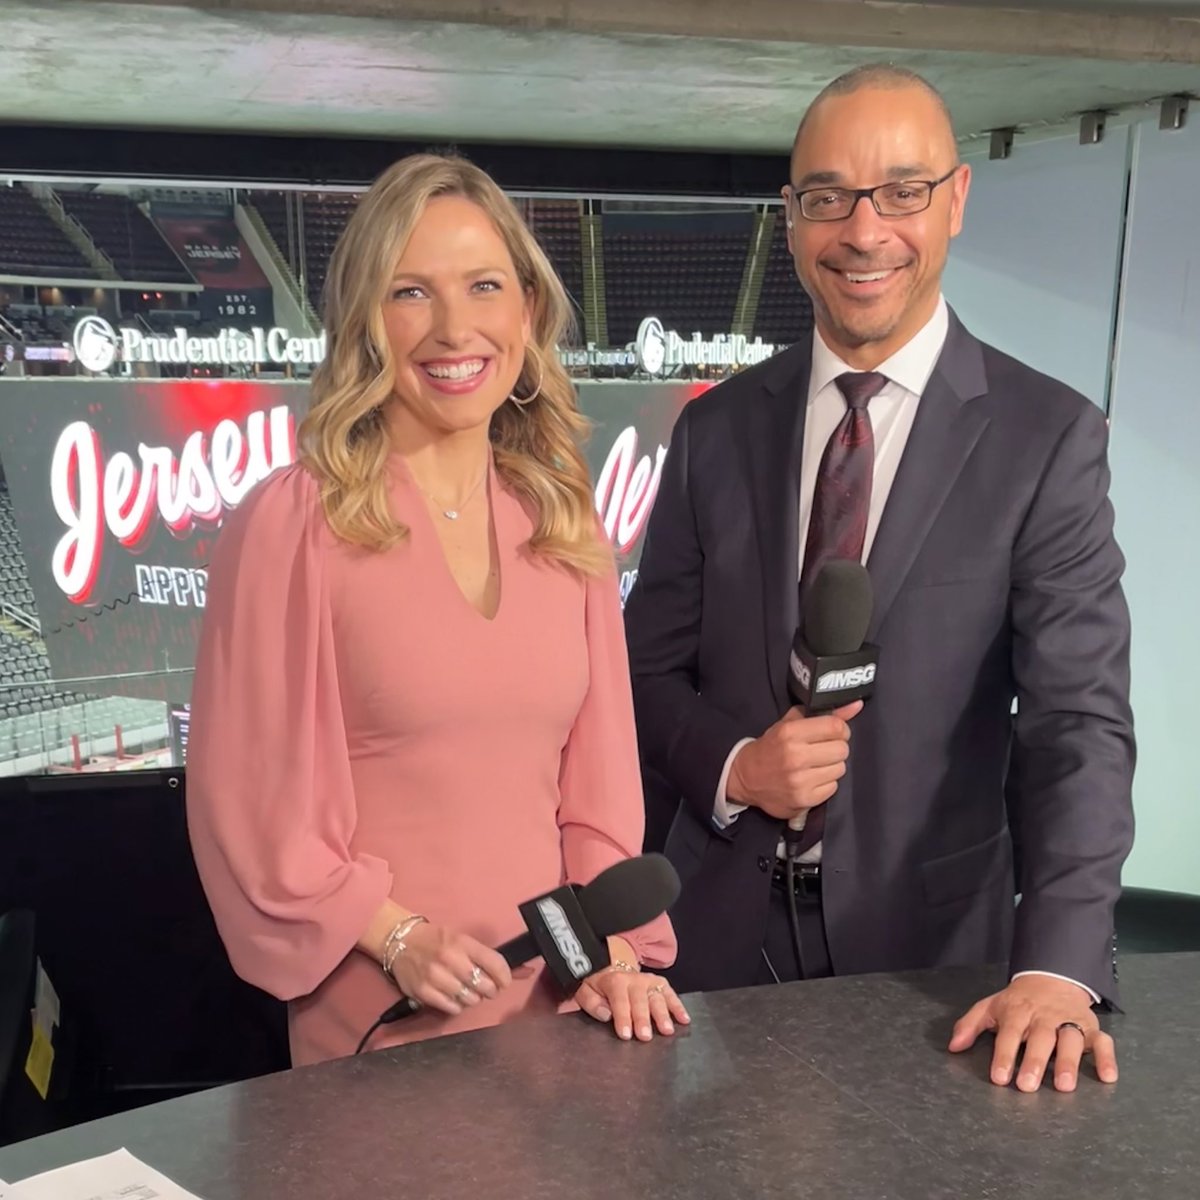 Can’t believe I just finished my 6th season with @DevilsMSGN ! Our crew is just awesome and I’m lucky to have the best on-air partner @BryceSalvador . Hope you enjoyed our #NJDevils pre/post/intermissions this year! Thanks for tuning in!! 📺